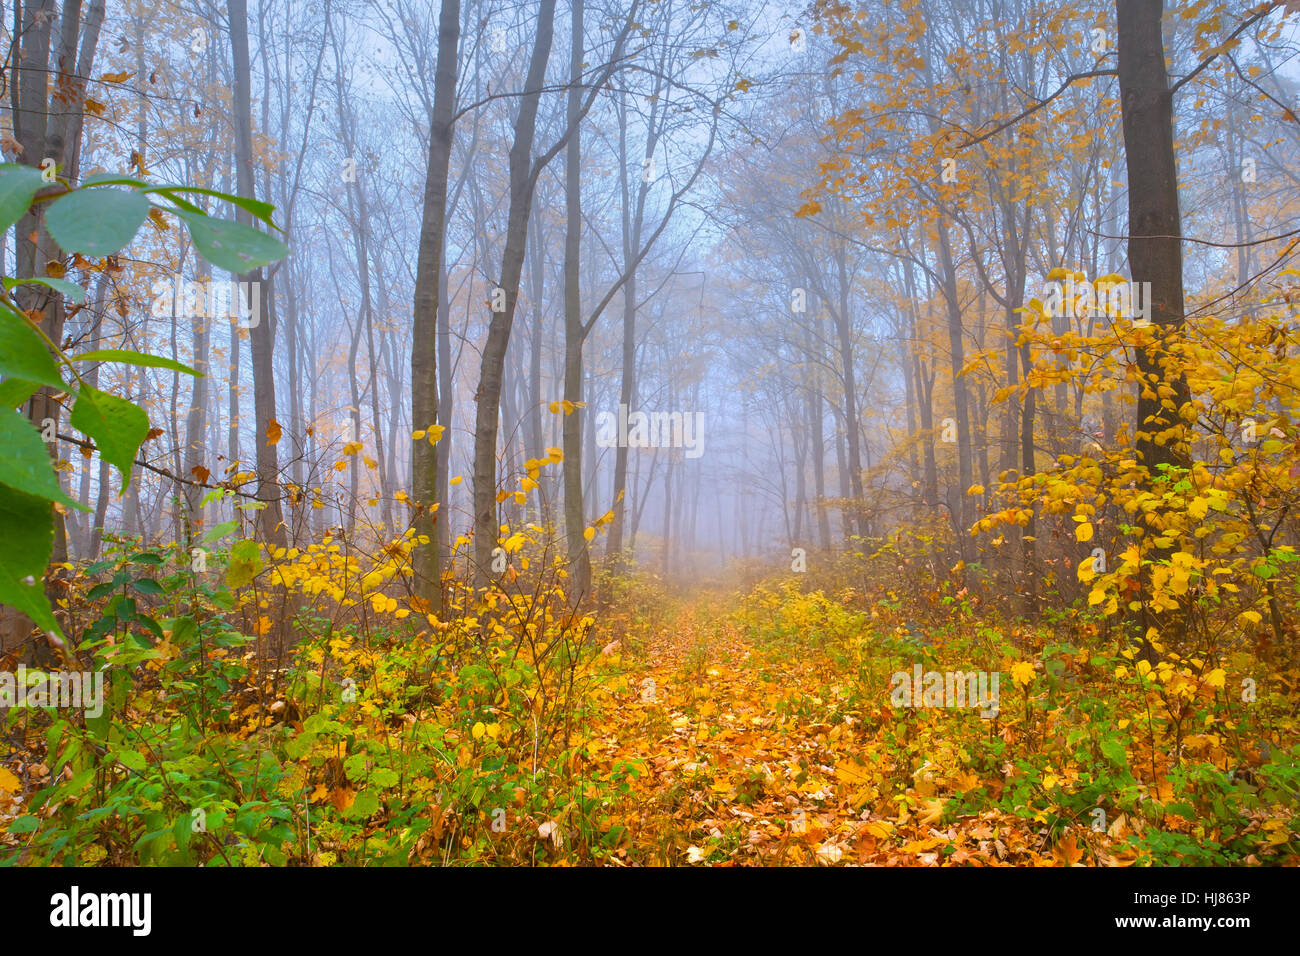 Colorful autumn landscape in the forest Stock Photo